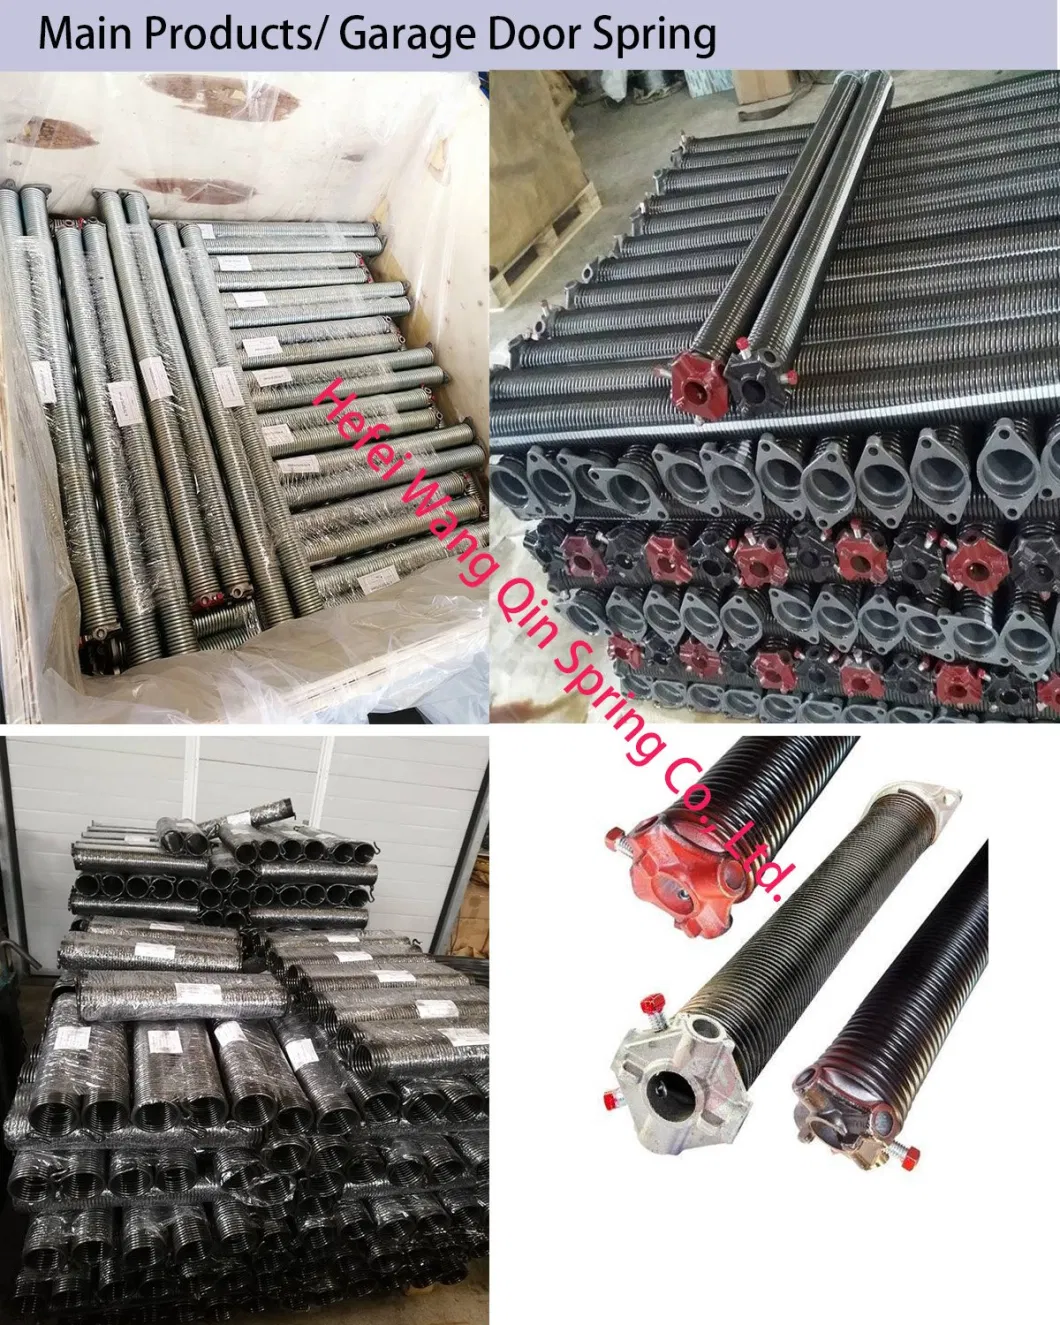 High Quality Garage Door Torsion Springs and Tension Spring by Professional Springs Manufacturer